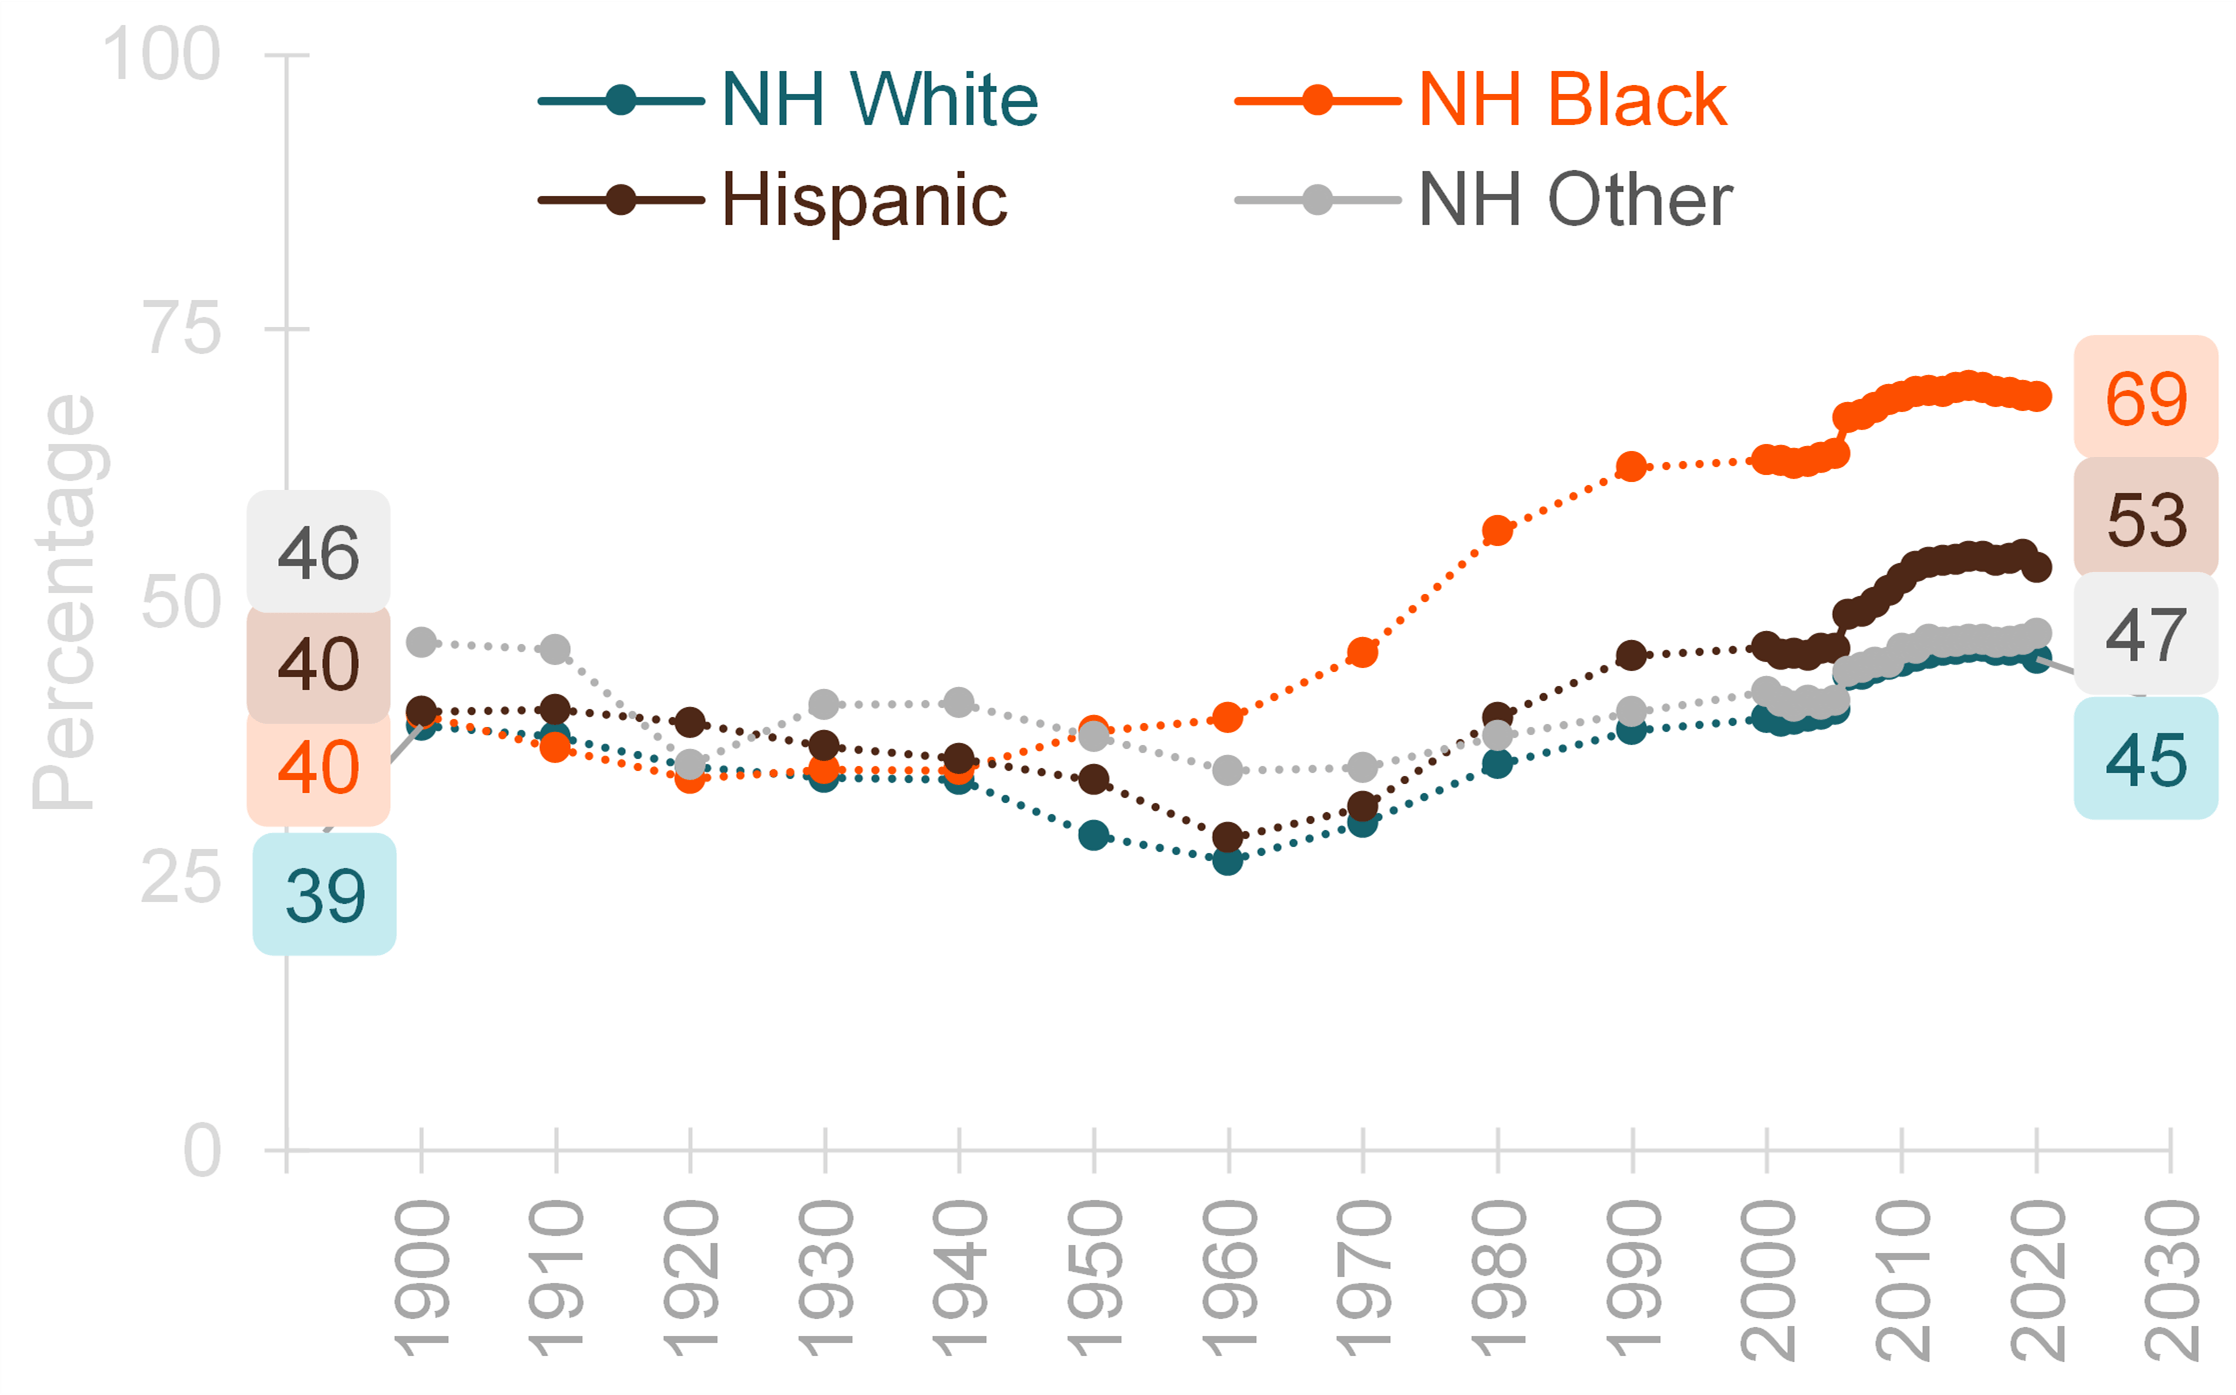 graph showing Figure 3. Percentage of Unmarried Adults in the US by Race & Ethnicity, 1900-2020